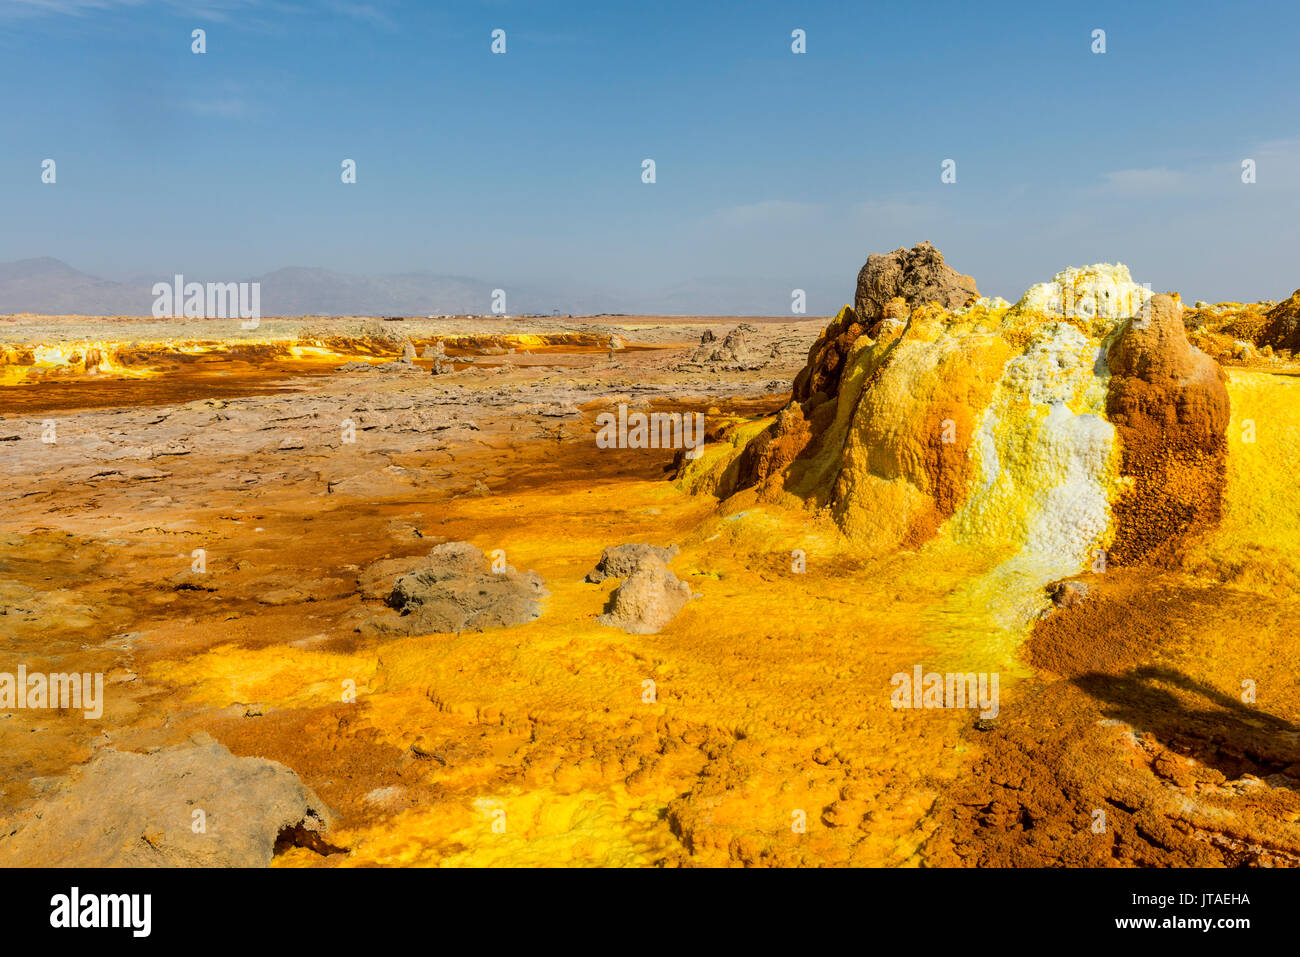 Colourful spings of acid in Dallol, hottest place on earth, Danakil depression, Ethiopia, Africa Stock Photo